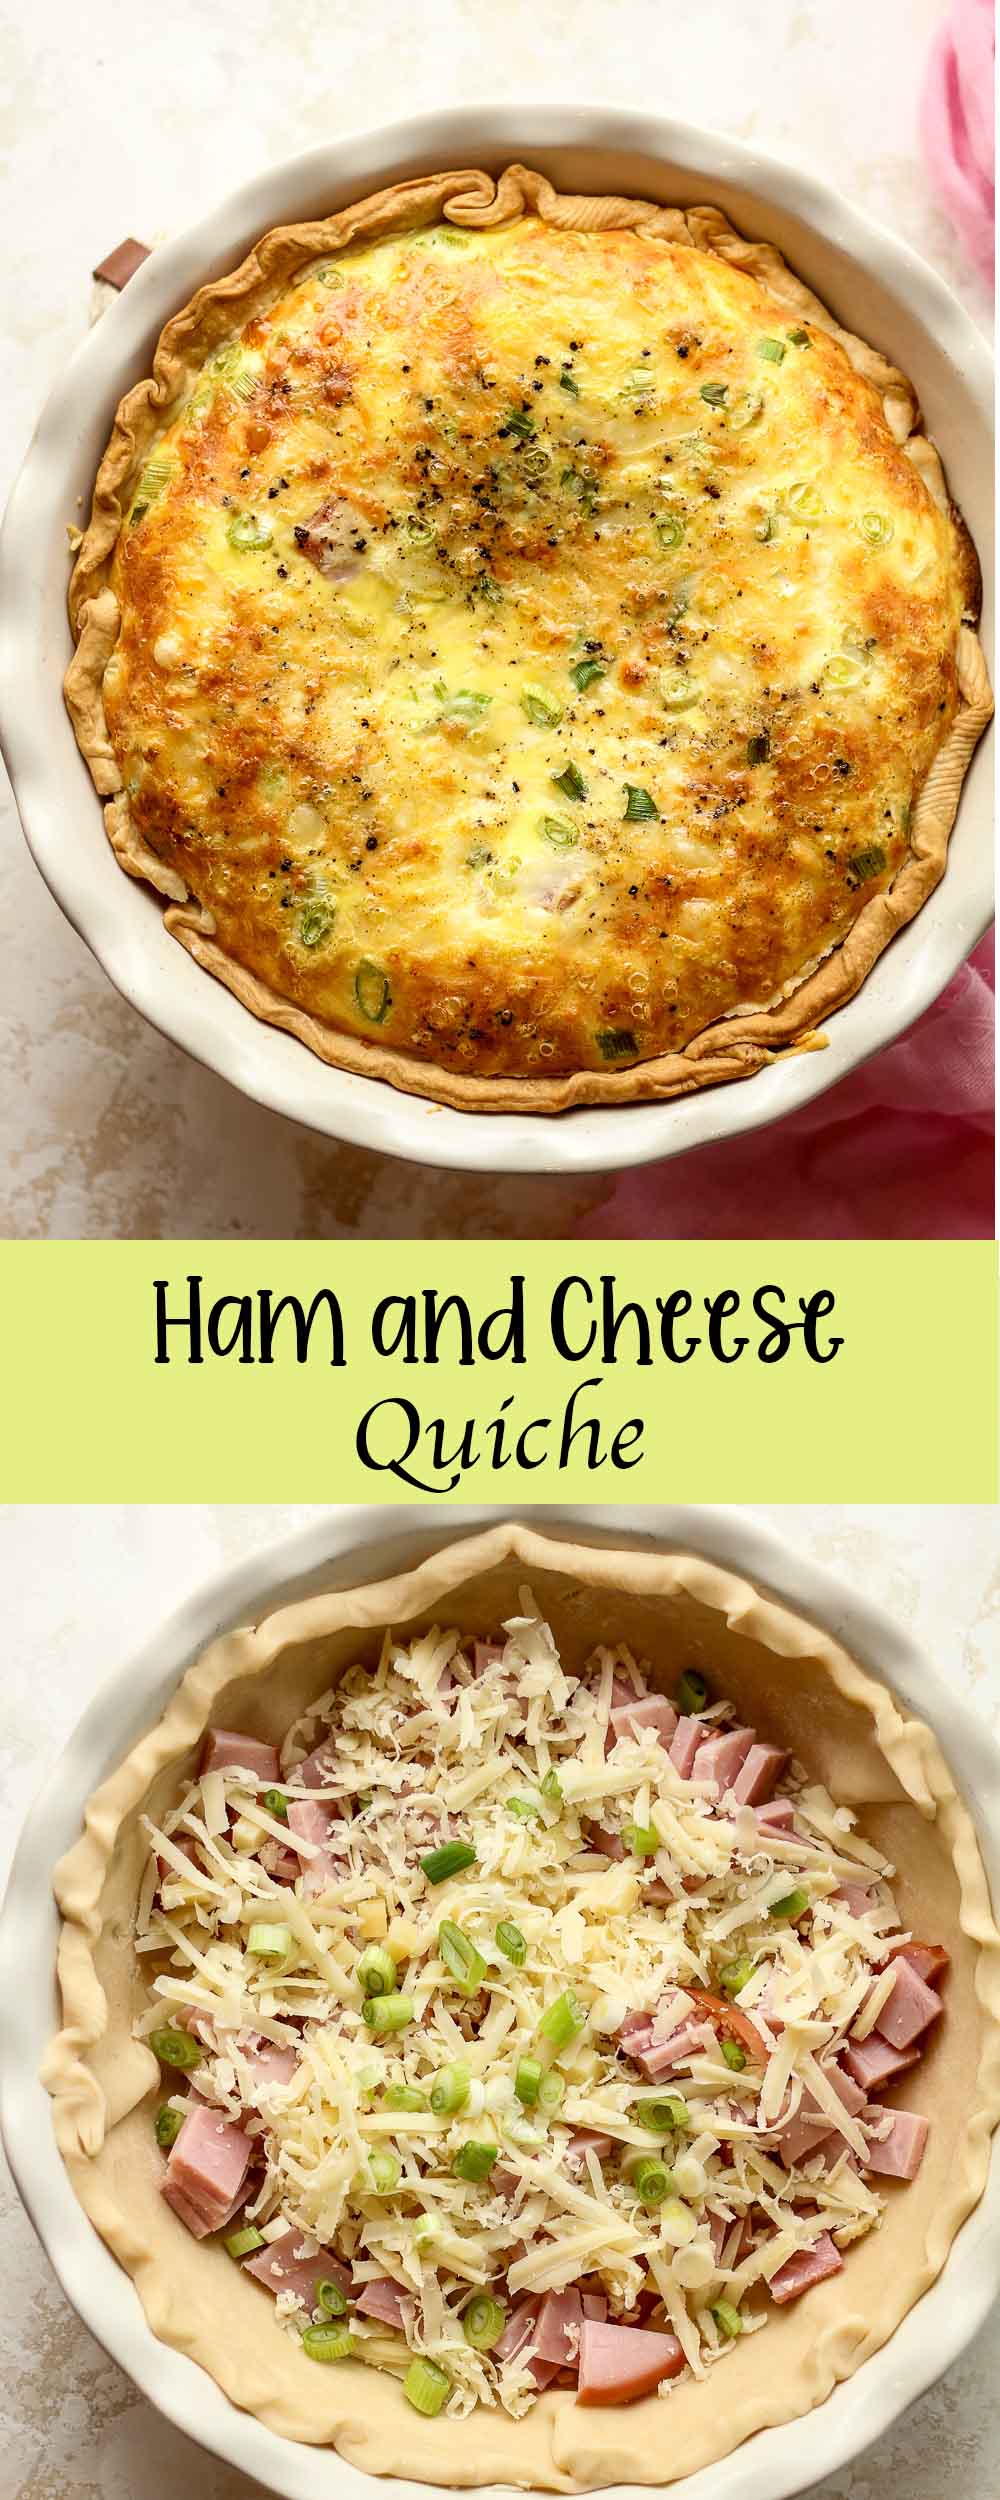 Two photos of ham and cheese quiche.